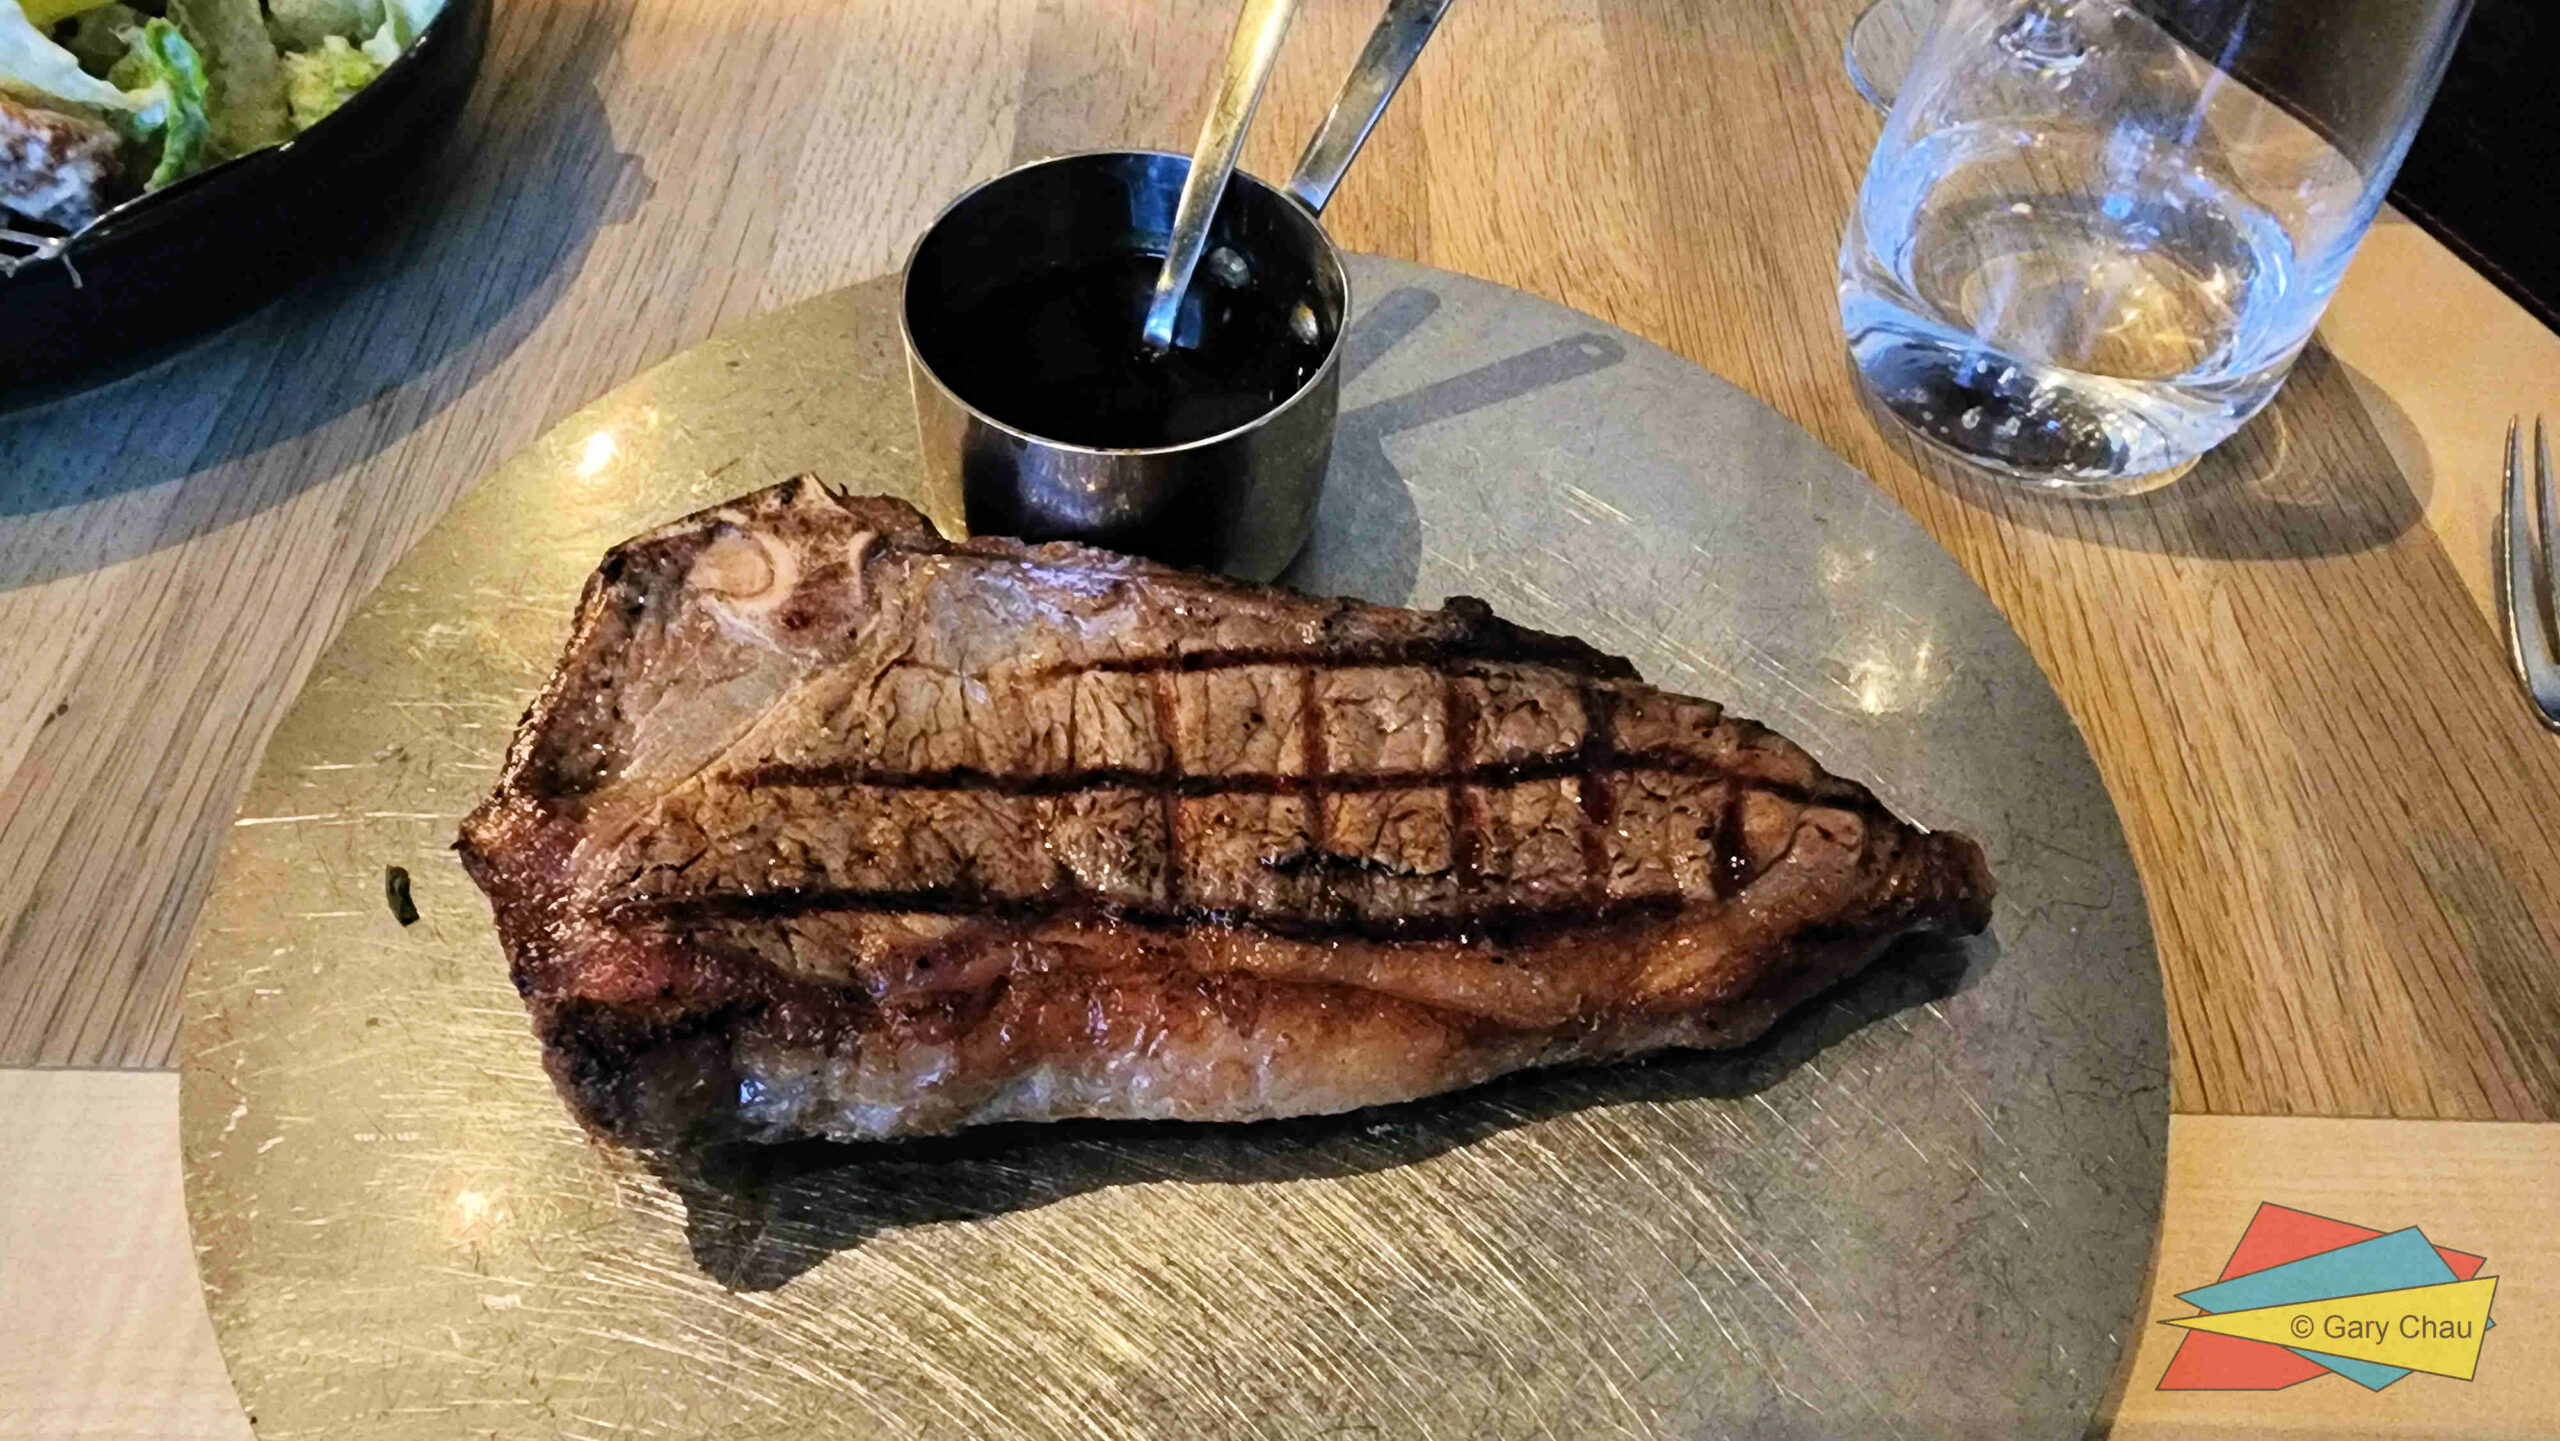 New York Sirloin (with bone) 400g for $60 with Pepper Sauce for $5